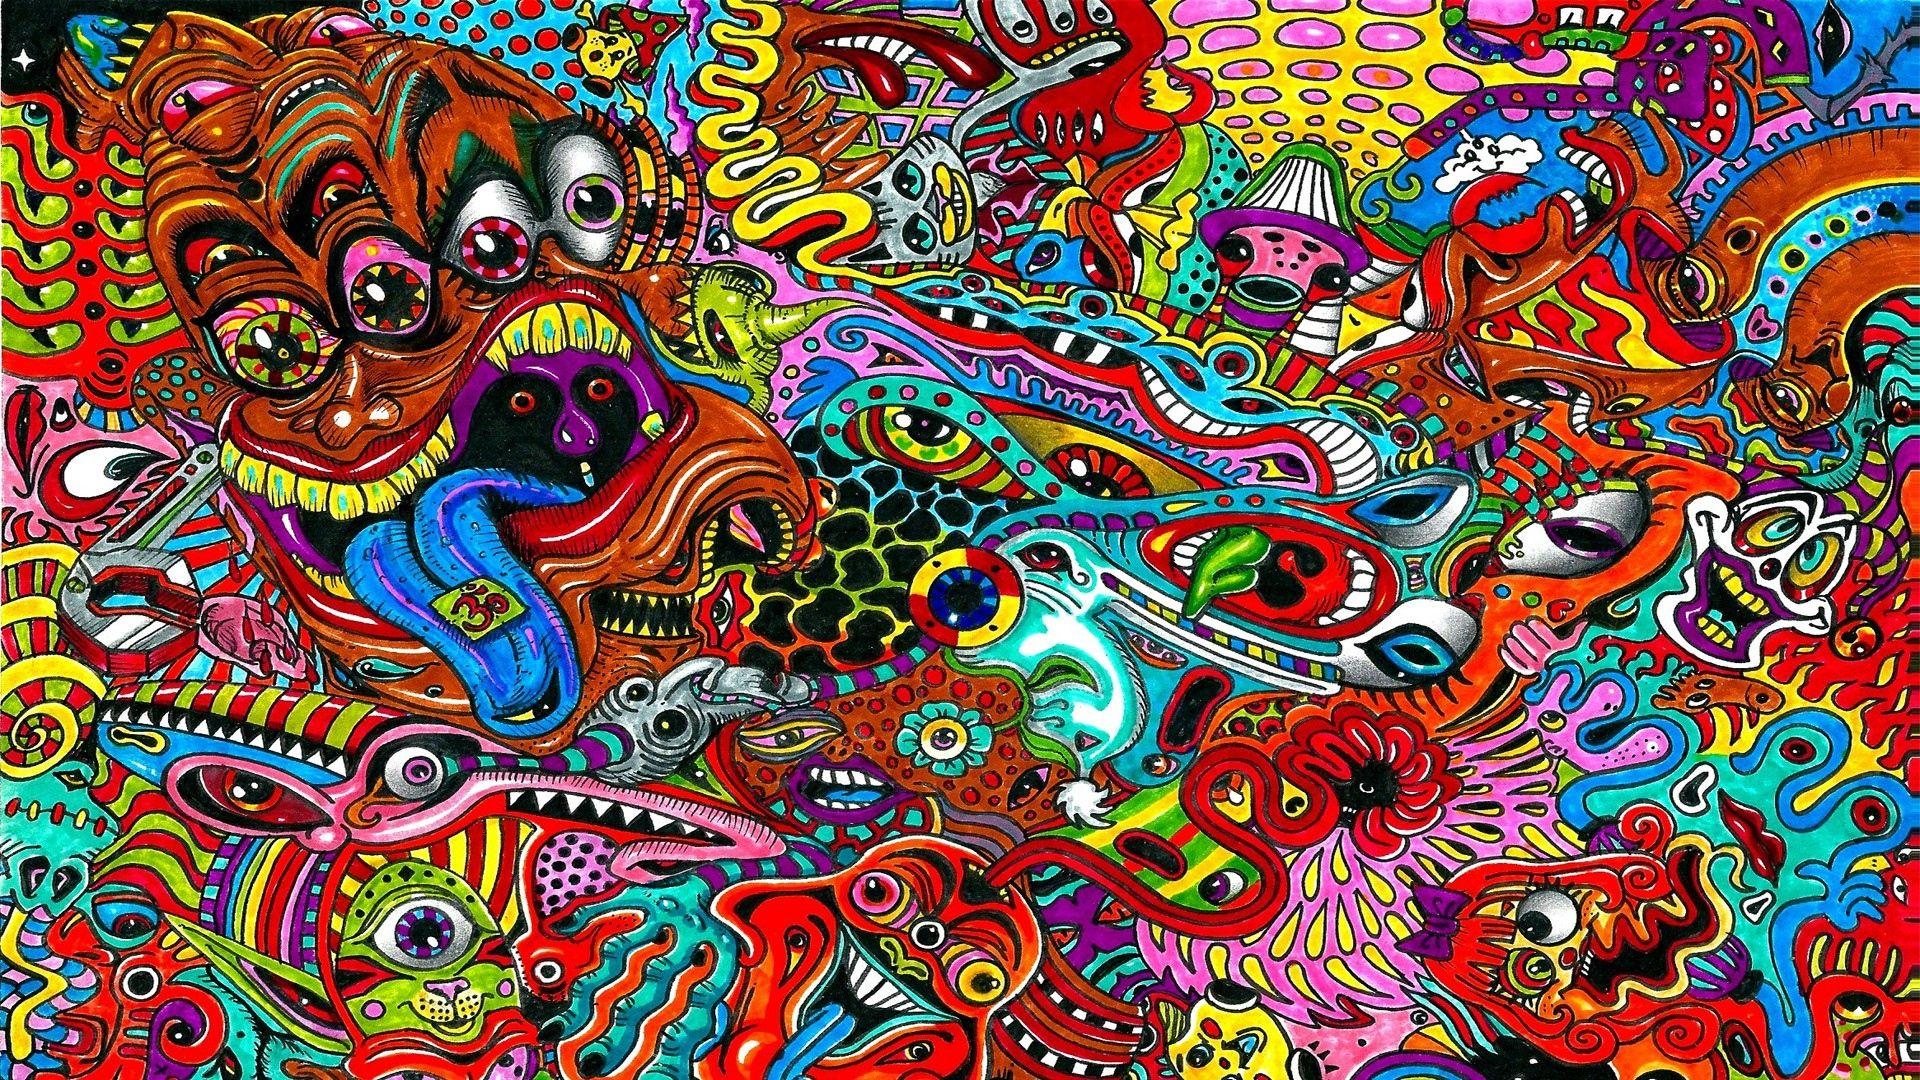 Download wallpaper 1920x1080 drawing, surreal, colorful, psychedelic